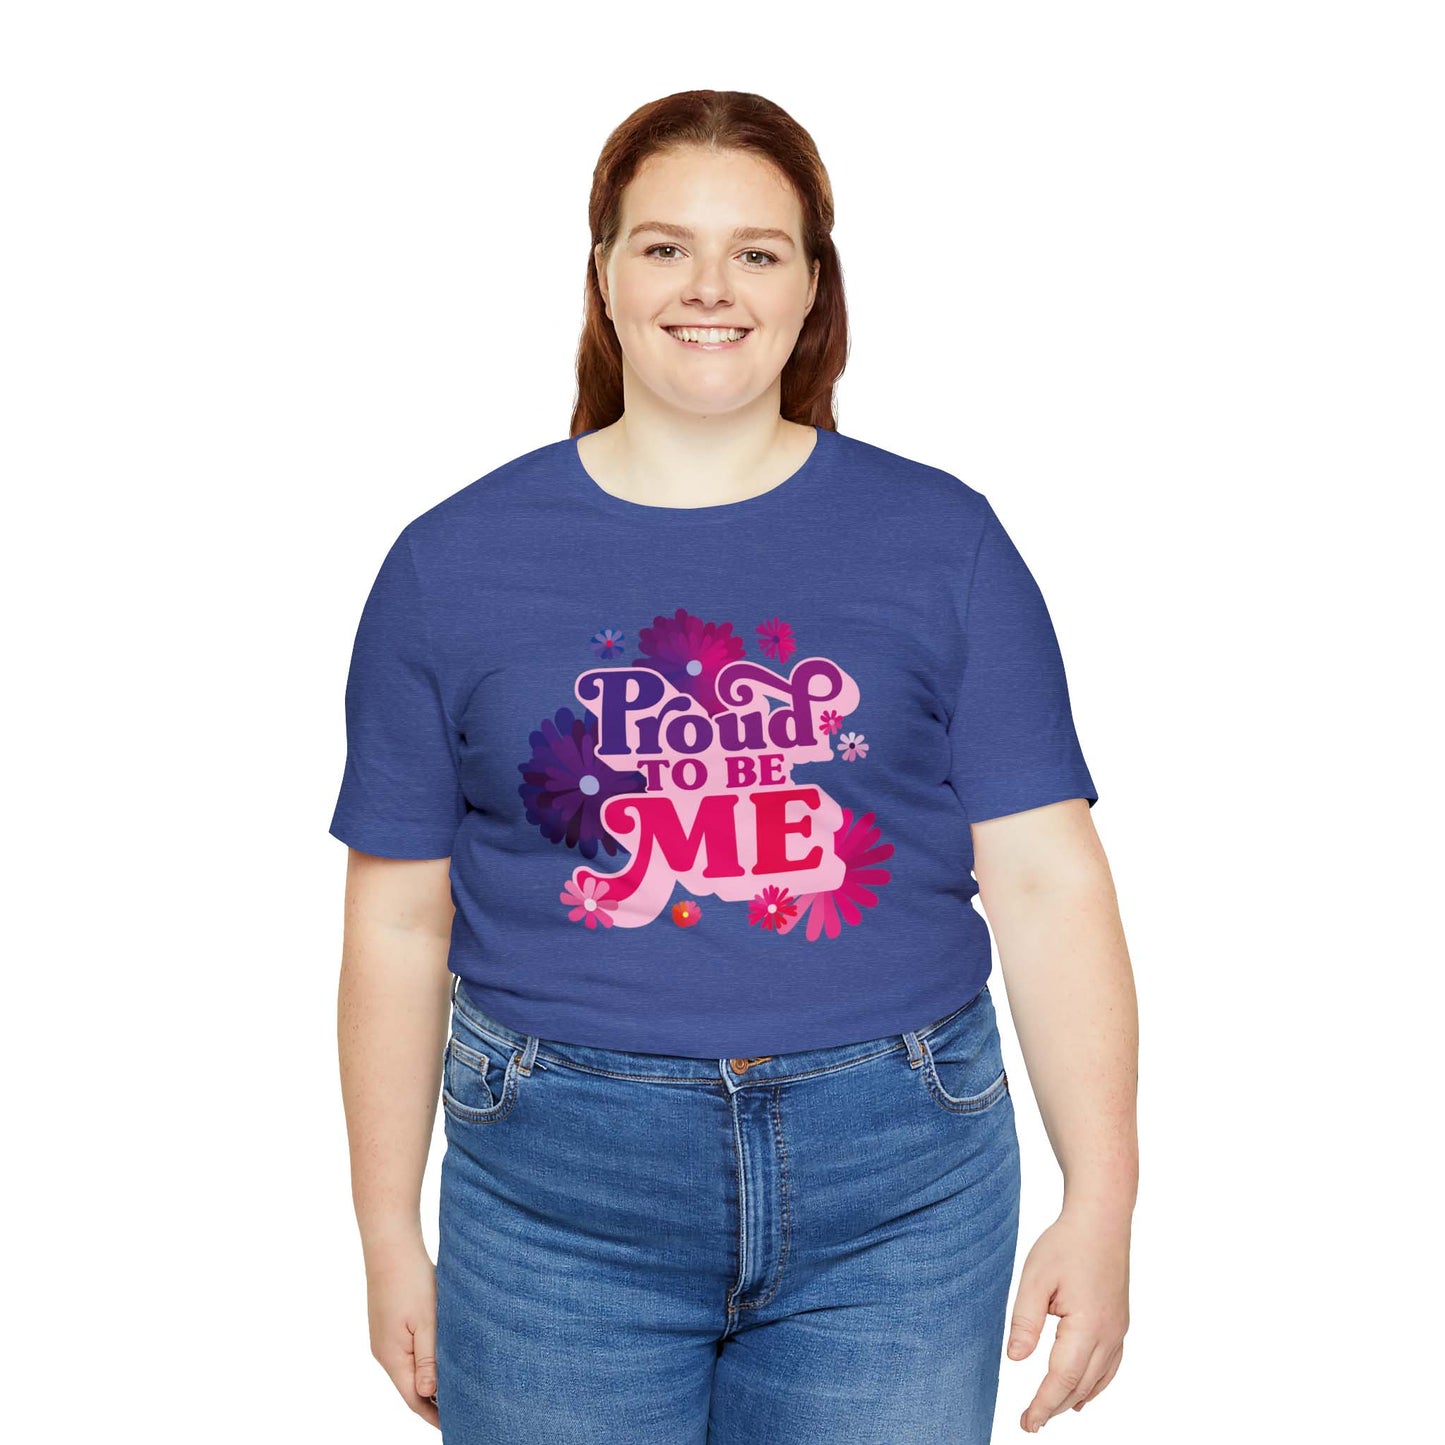 Meme t-shirt for women who are proud to be themselves! This t-shirt has our famous PROUD TO BE ME meme printed at the front of the t-shirt in pink and purple colors. Flowers surround the meme.